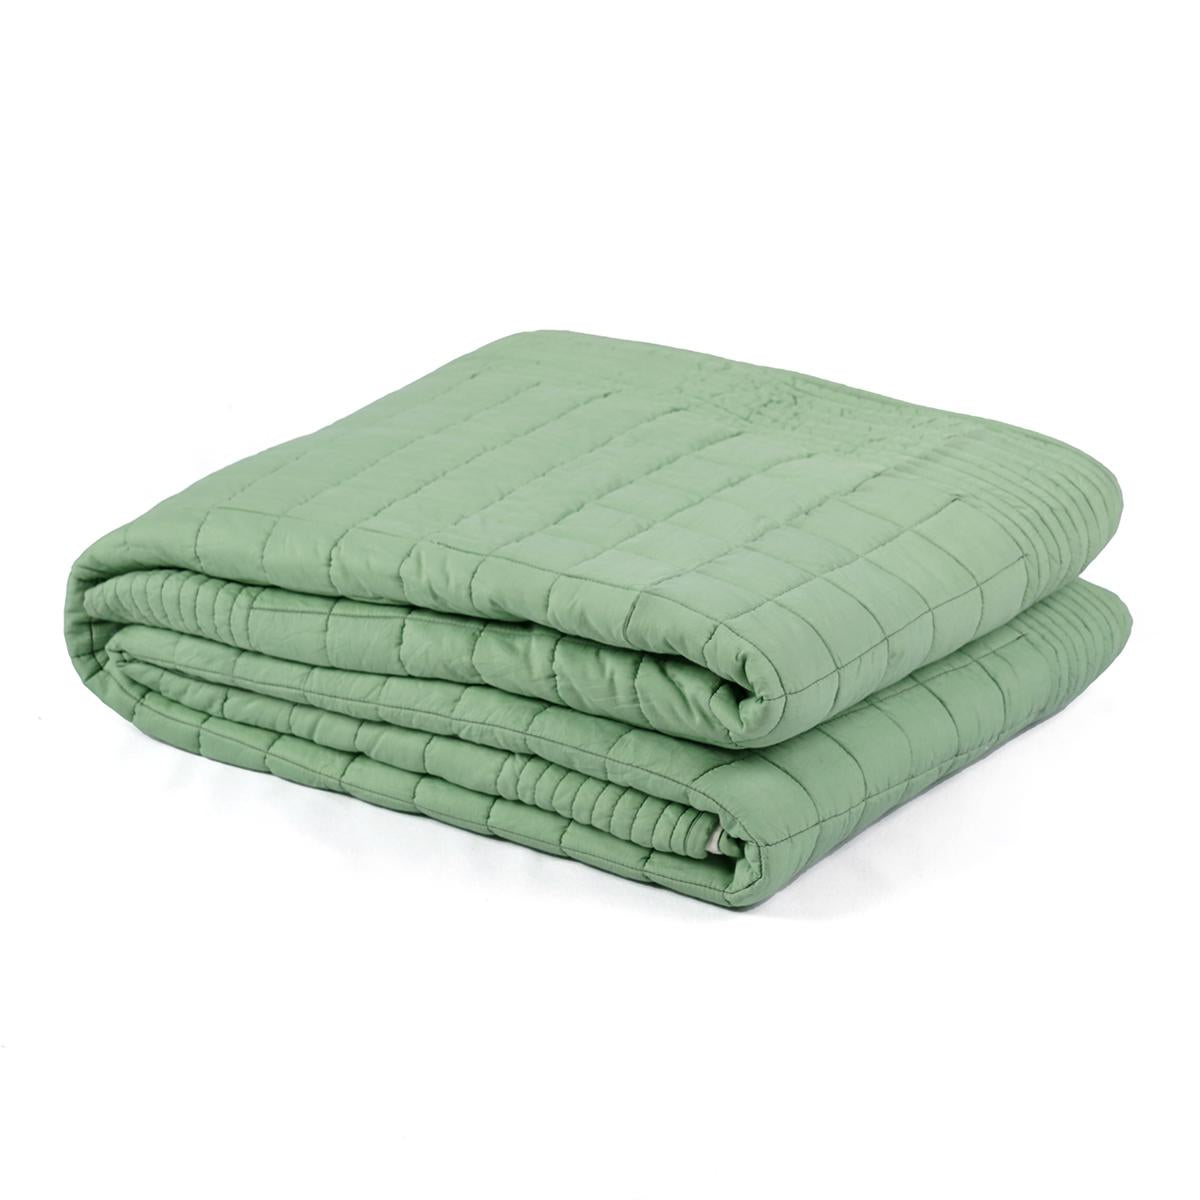 SAGE GREEN cotton quilted bedspread with check pattern, Sizes available